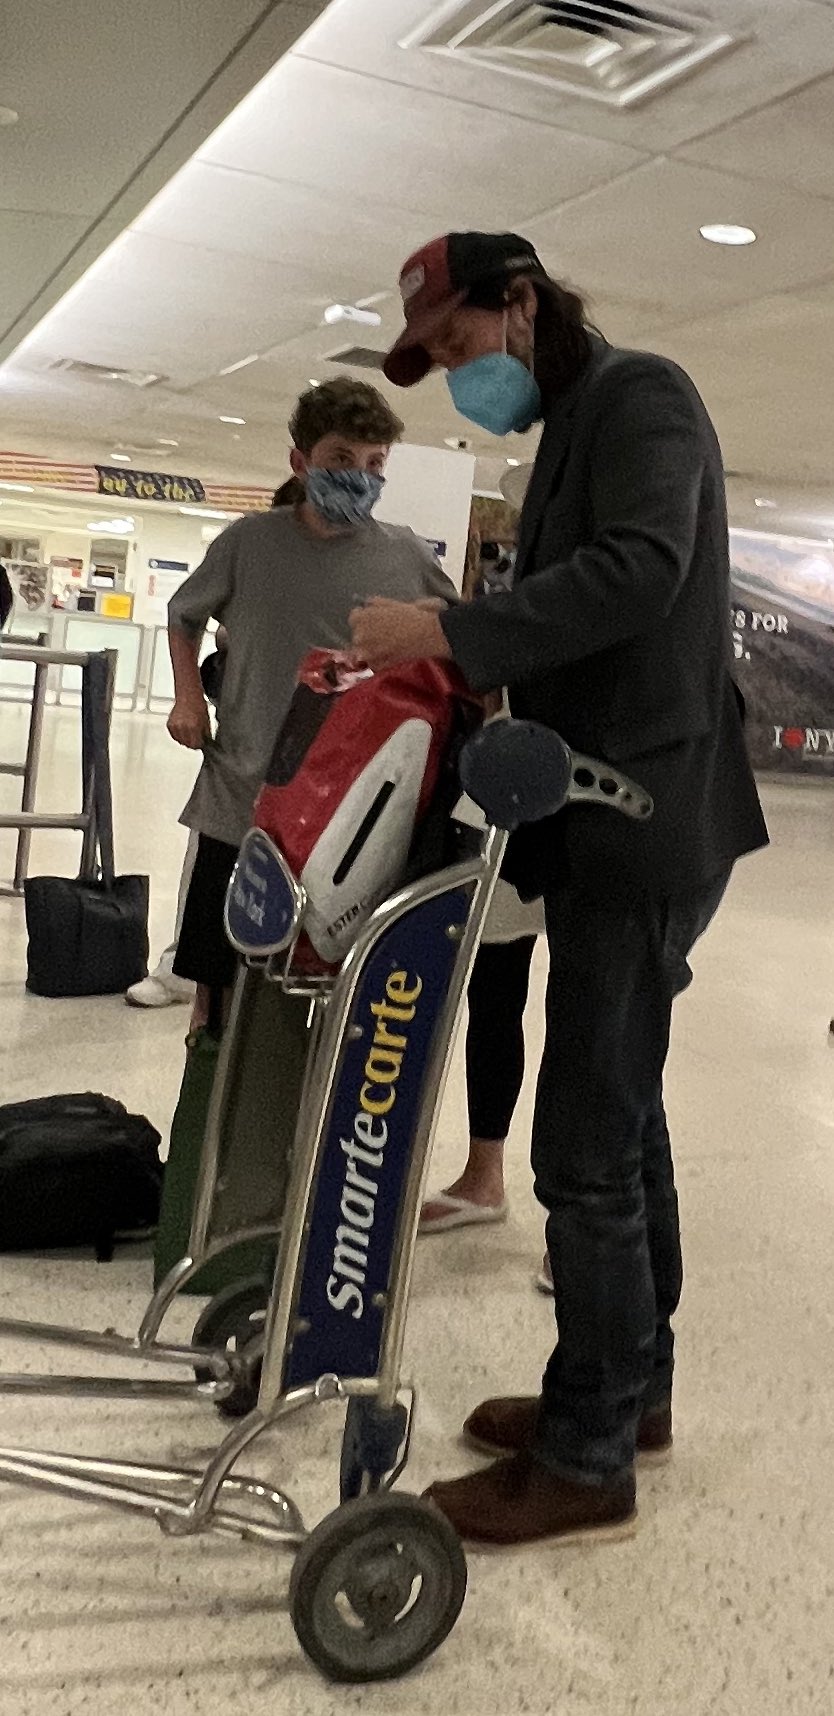 boy asking Keanu Reeves questions at airport.